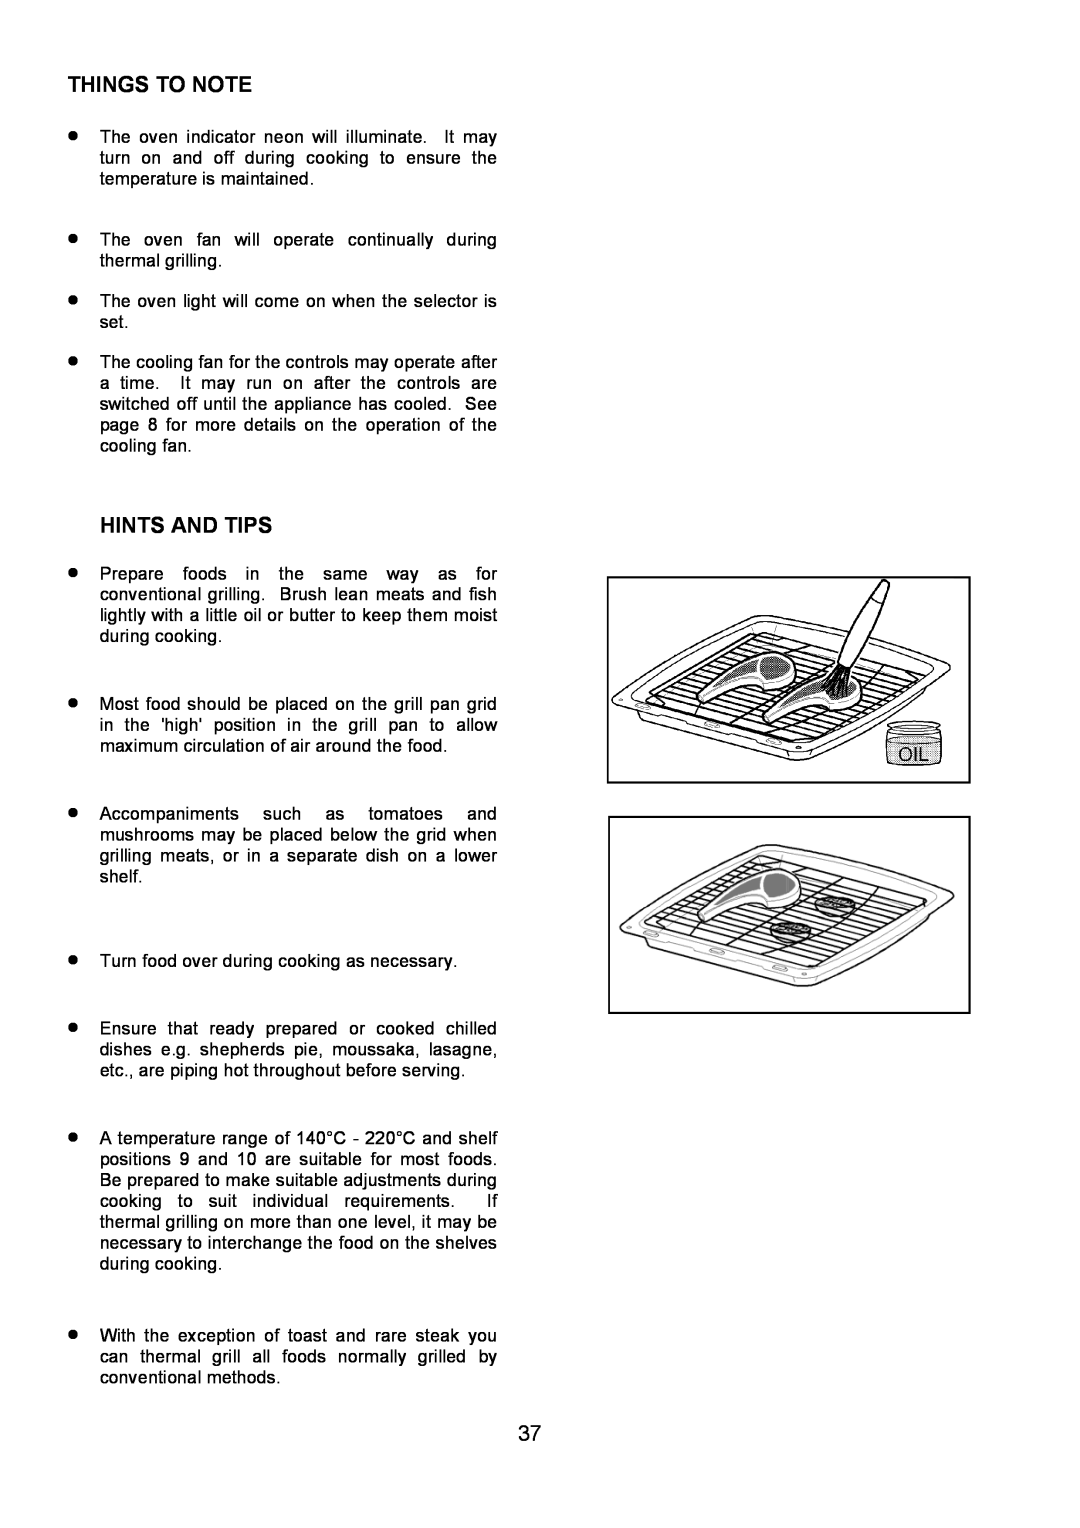 Zanussi 311608901 manual Things To Note, Hints And Tips, Turn food over during cooking as necessary 